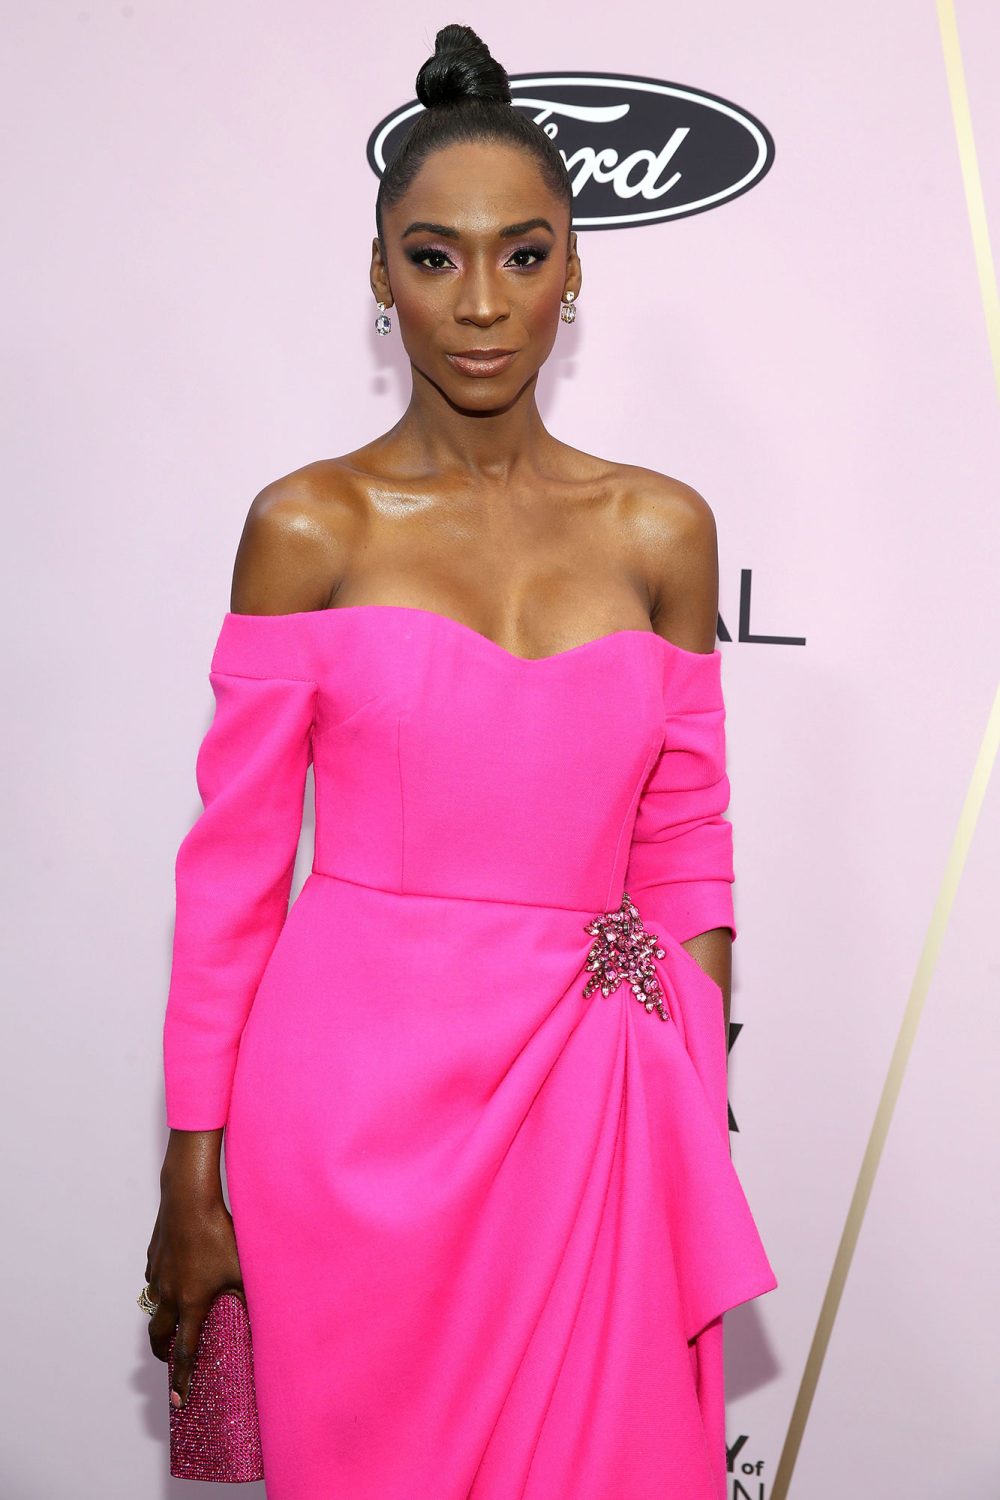 Angelica Ross Discovers Her New Boyfriend Has a Fiancee and a Kid After Posting Pics of Him Twitter Essence Black Women in Hollywood Awards